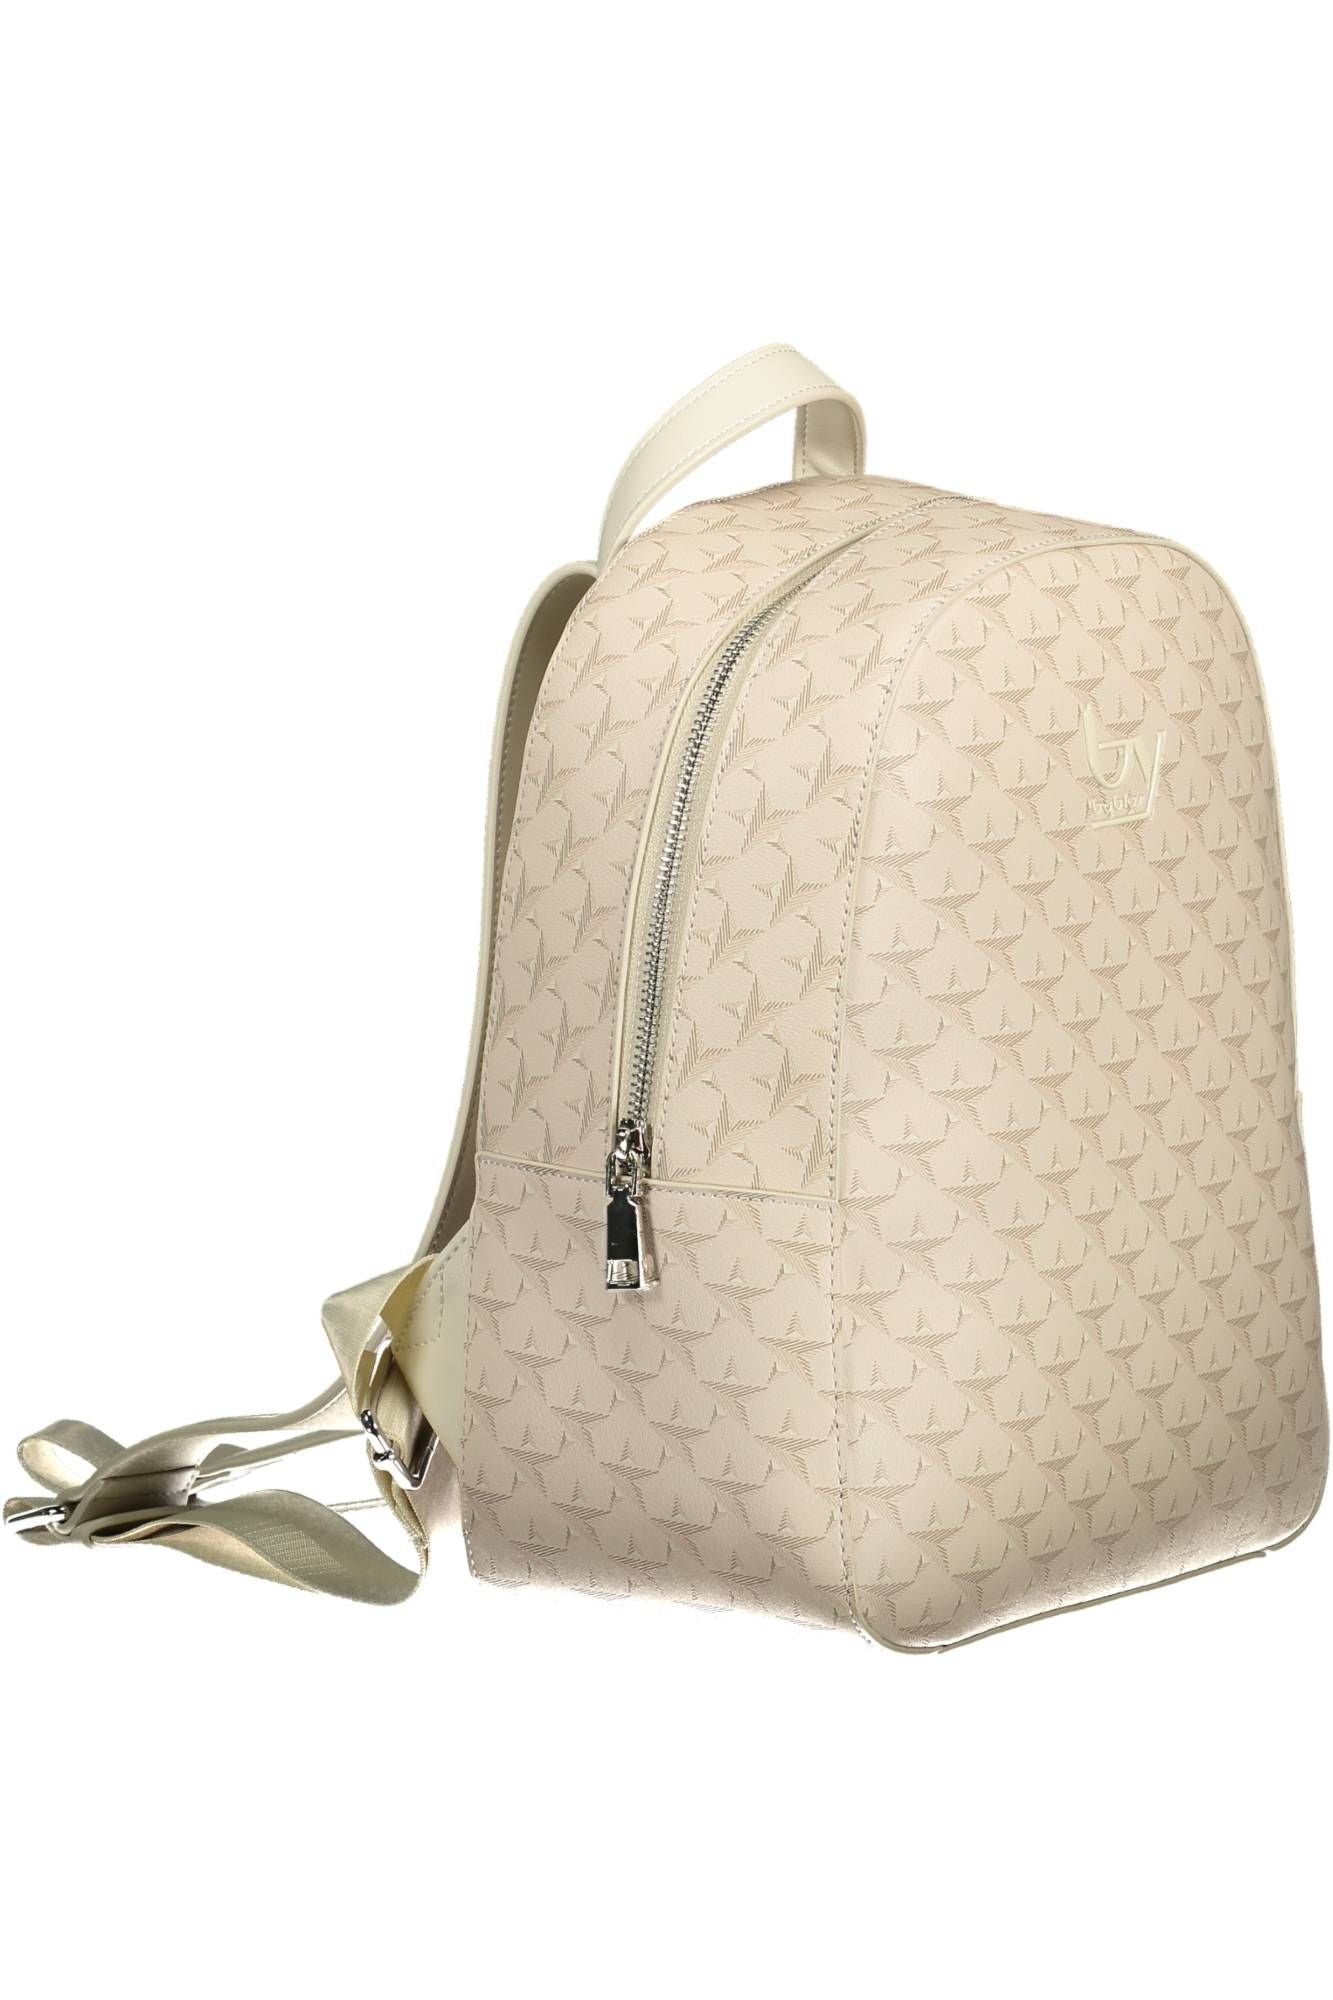 BYBLOS Elegant Beige Backpack with Contrasting Accents